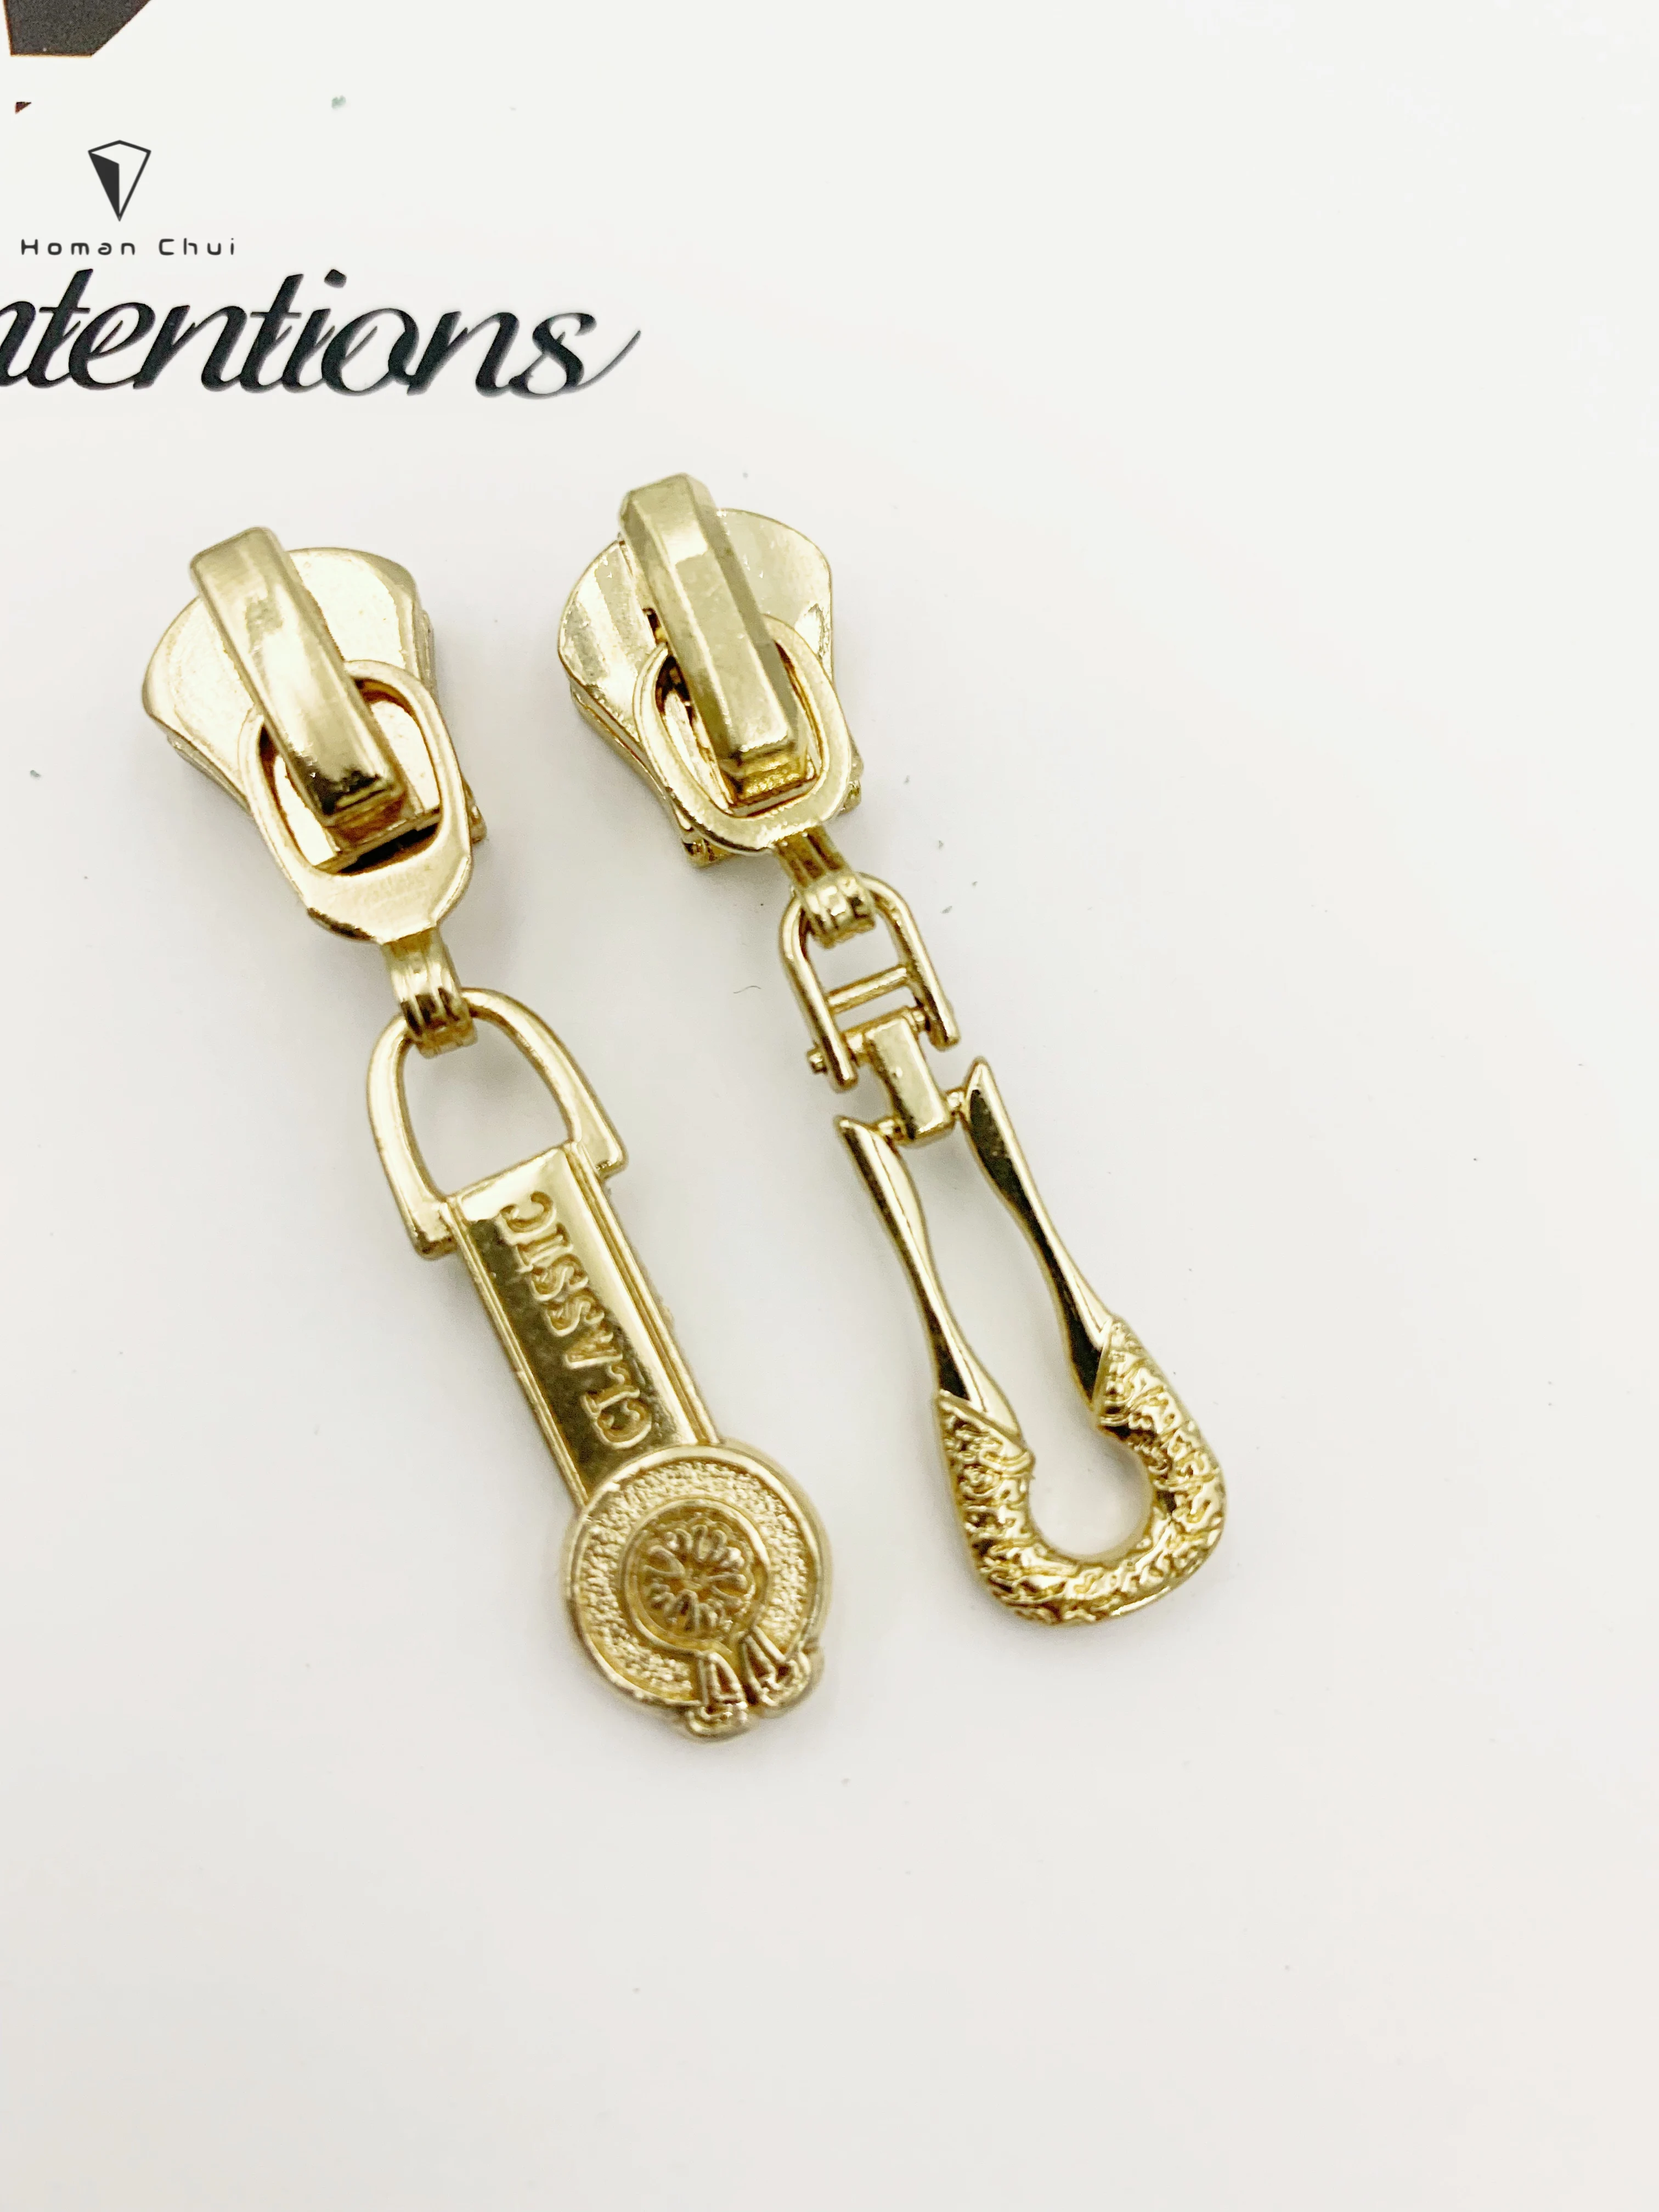 
customized brand logo embossed metal zipper puller with slider for bags/clothing 